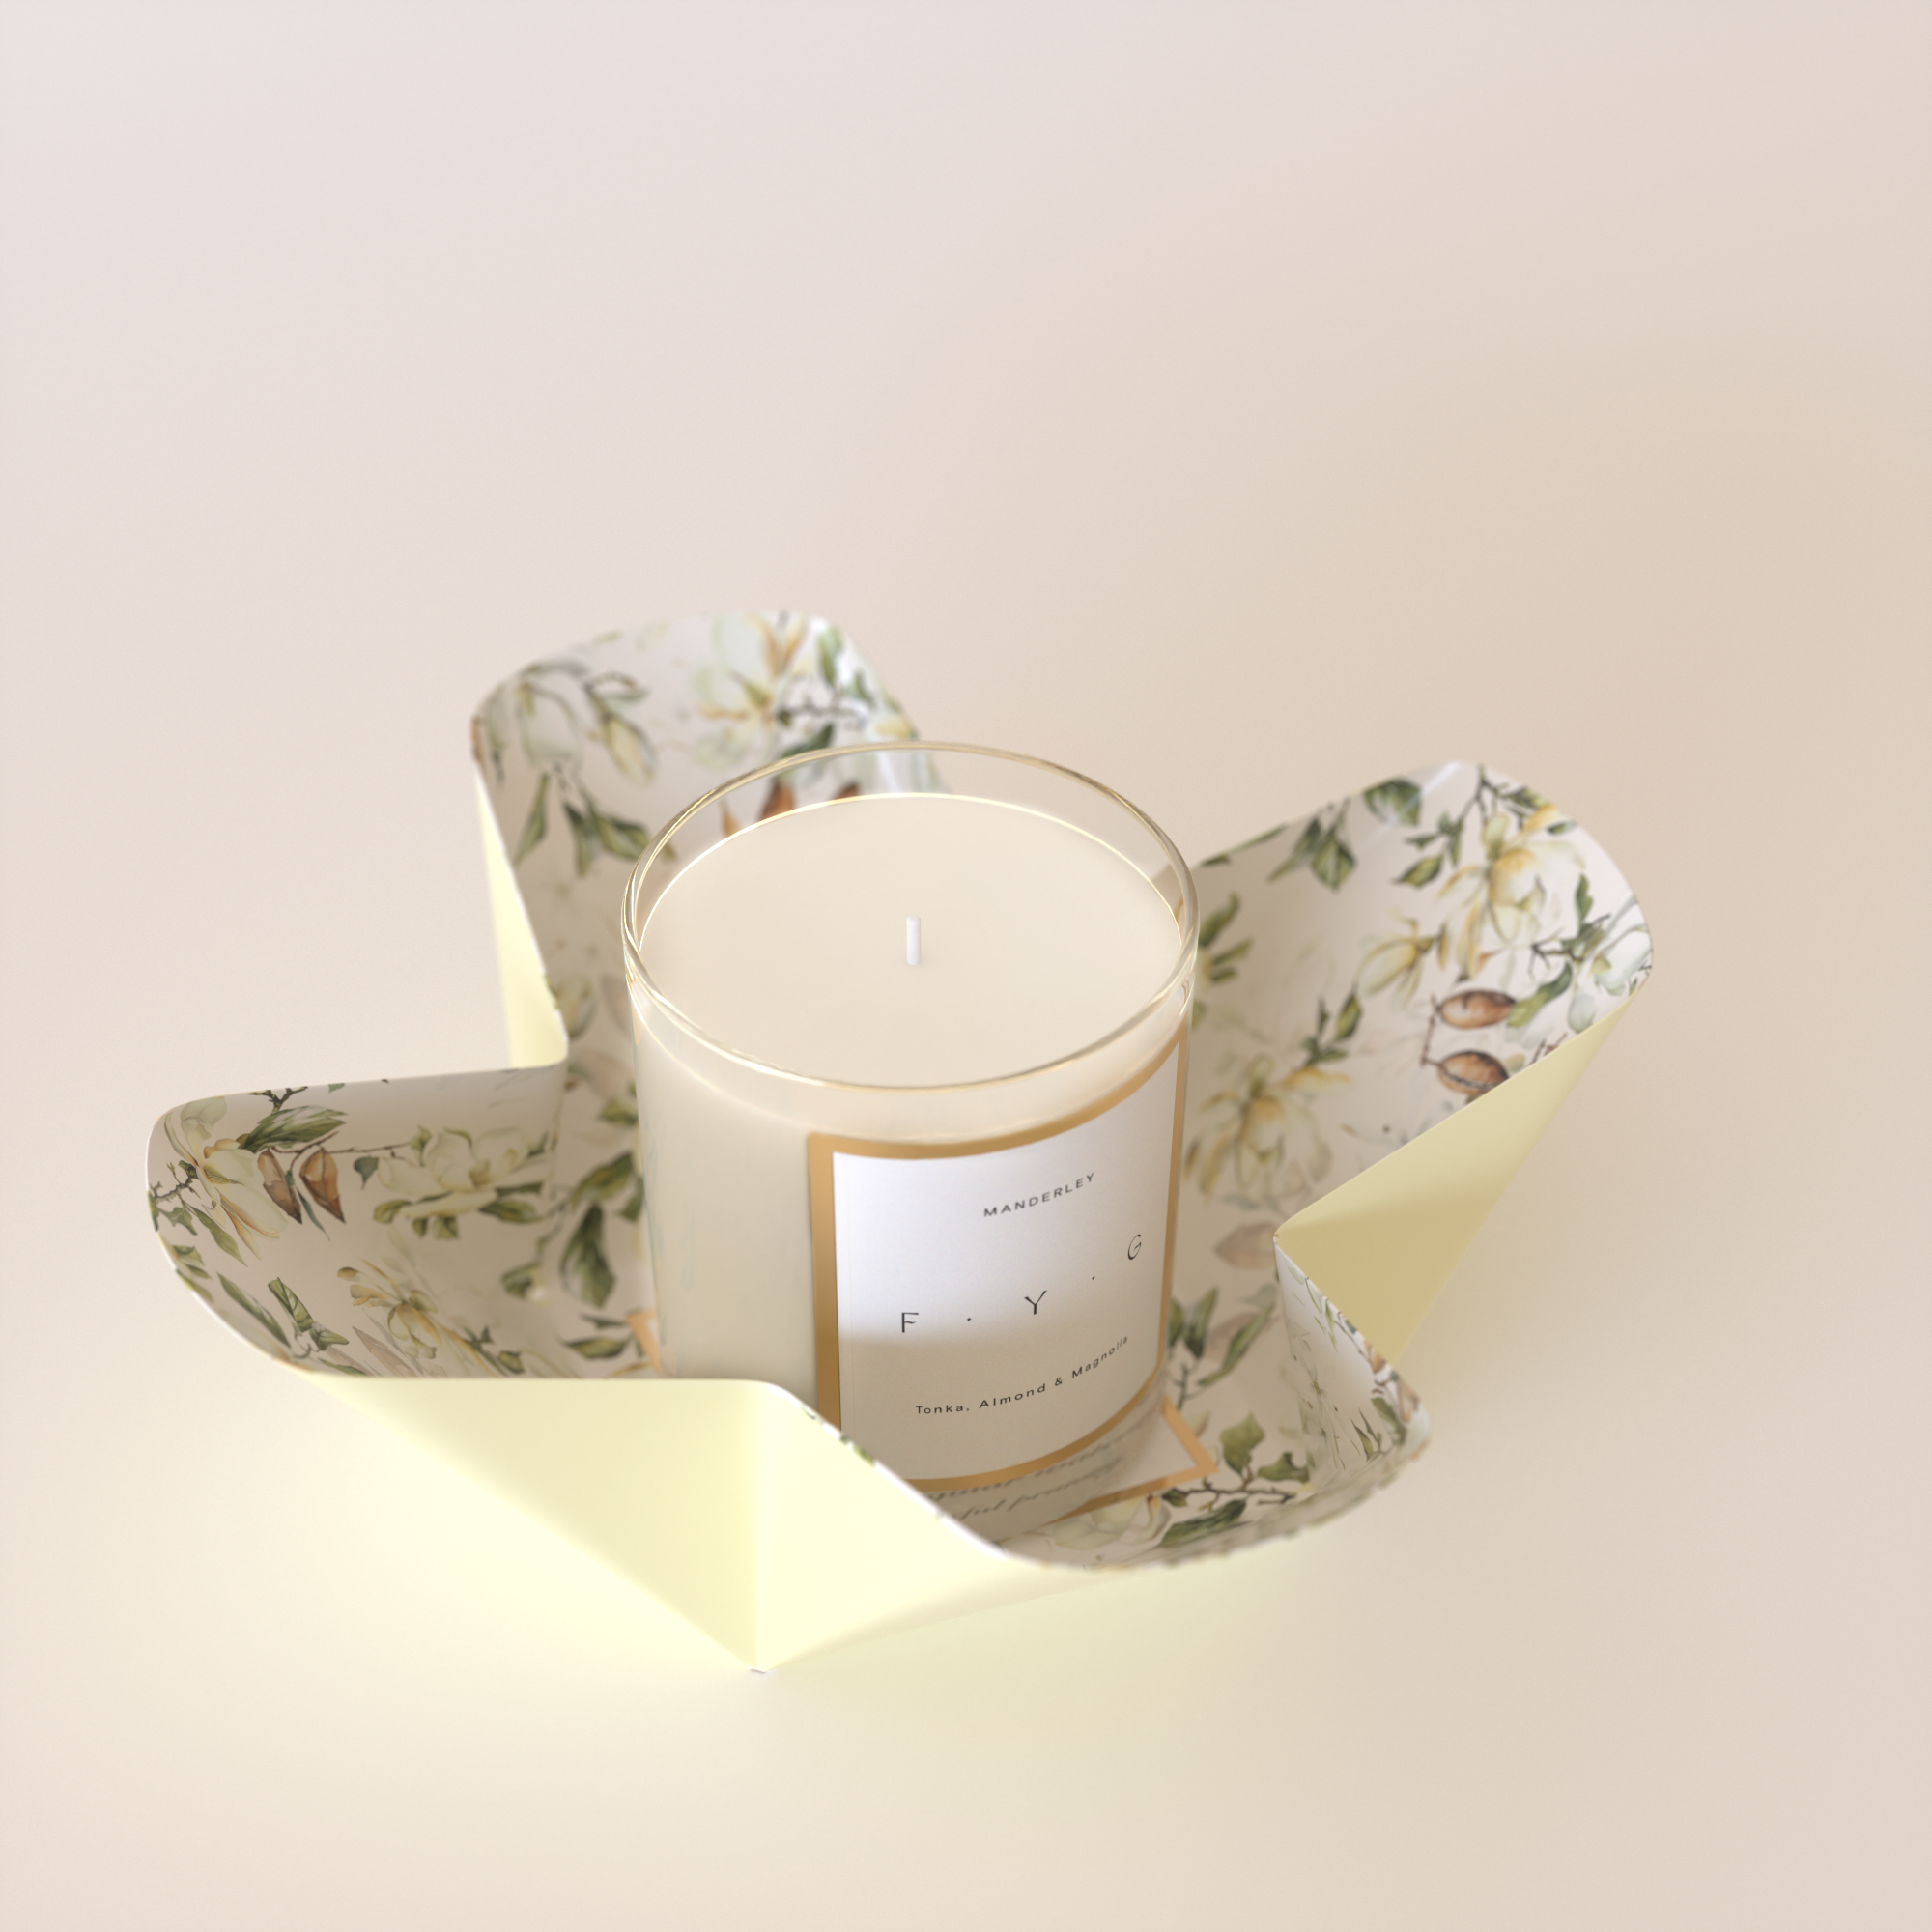 Find Your Glow Manderley Candle